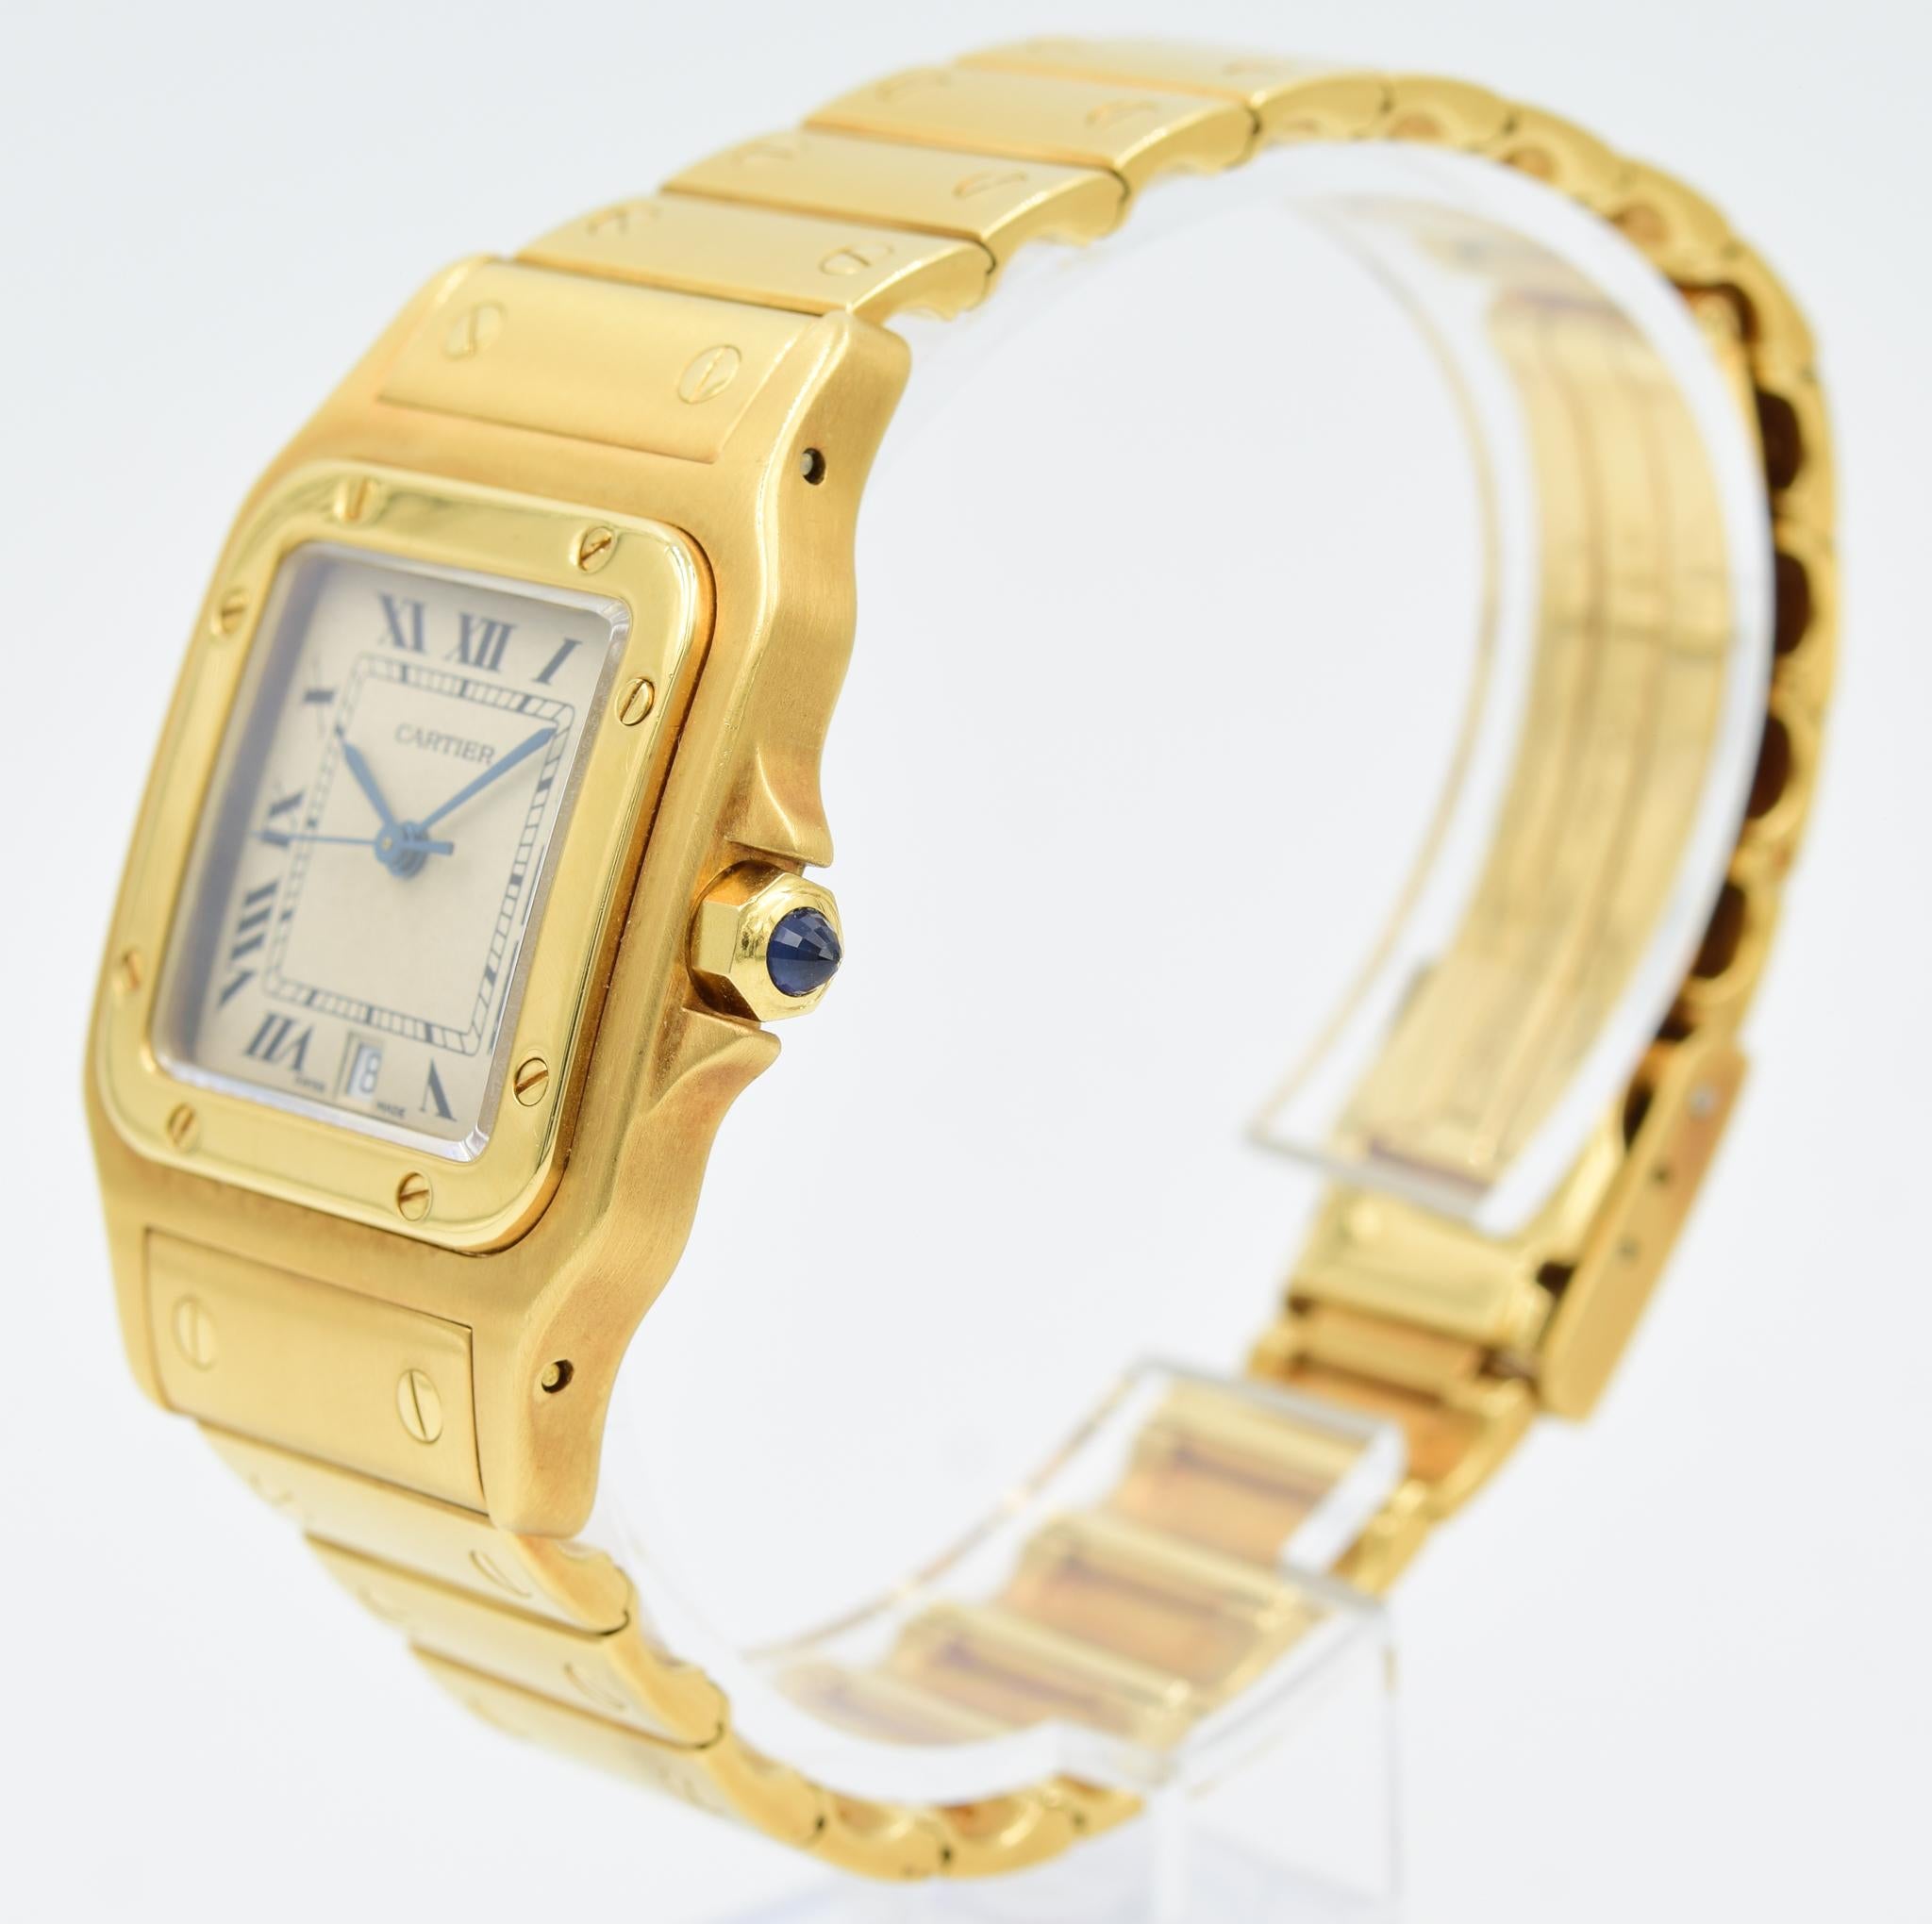 This Cartier Santos 887901 was recently traded in to our store and is in very good condition. This model has a quartz movement. The watch is in a 29mm 18k yellow gold case on a bracelet. The dial is silver with the signature blue hands.
